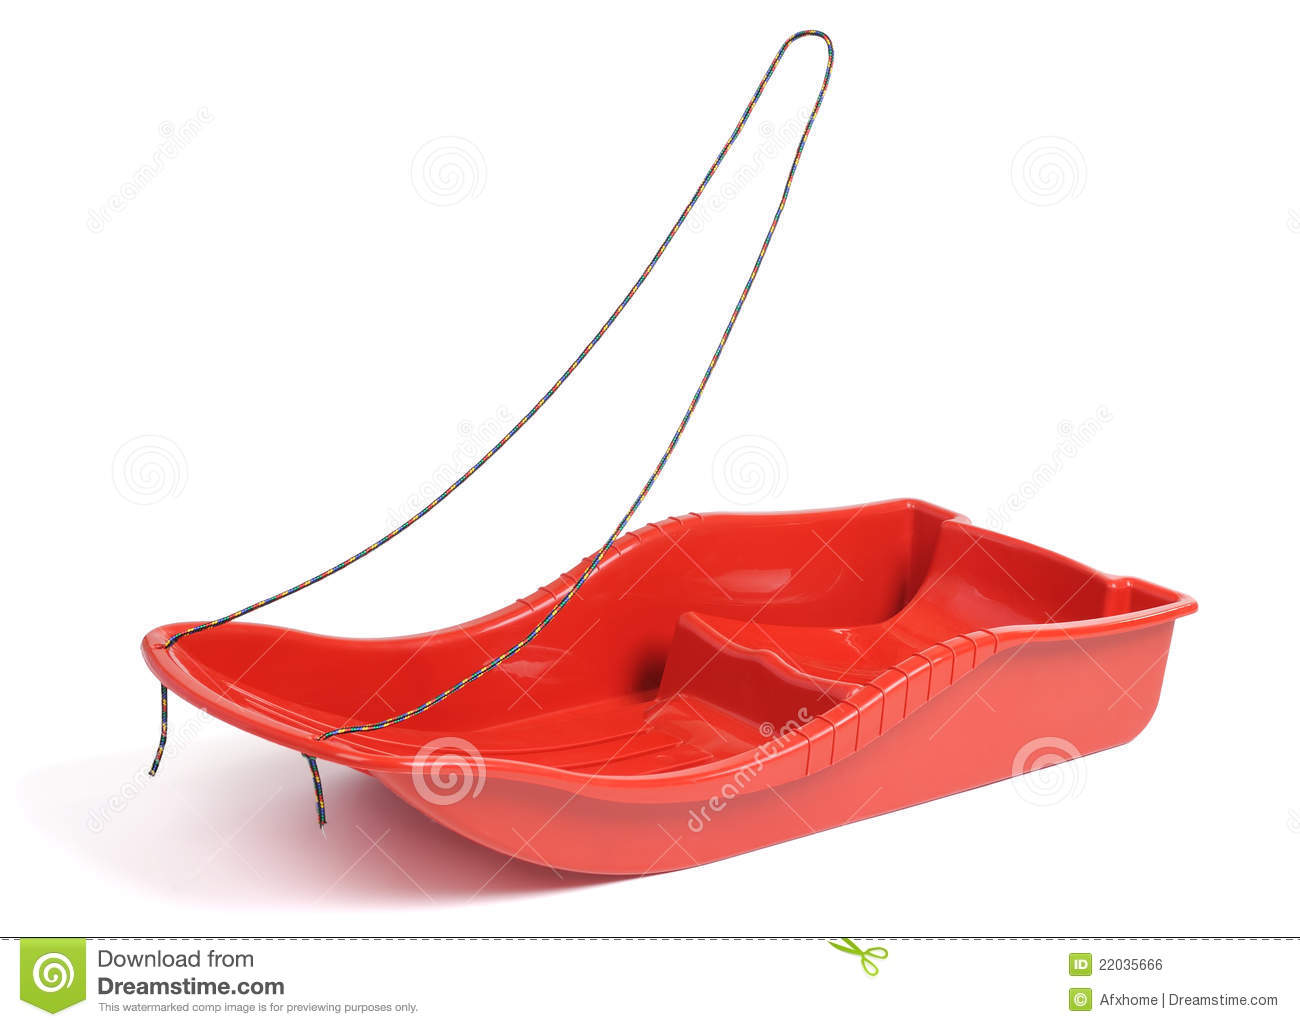 Plastic Red Sled For Skiing Royalty Free Stock Image   Image  22035666